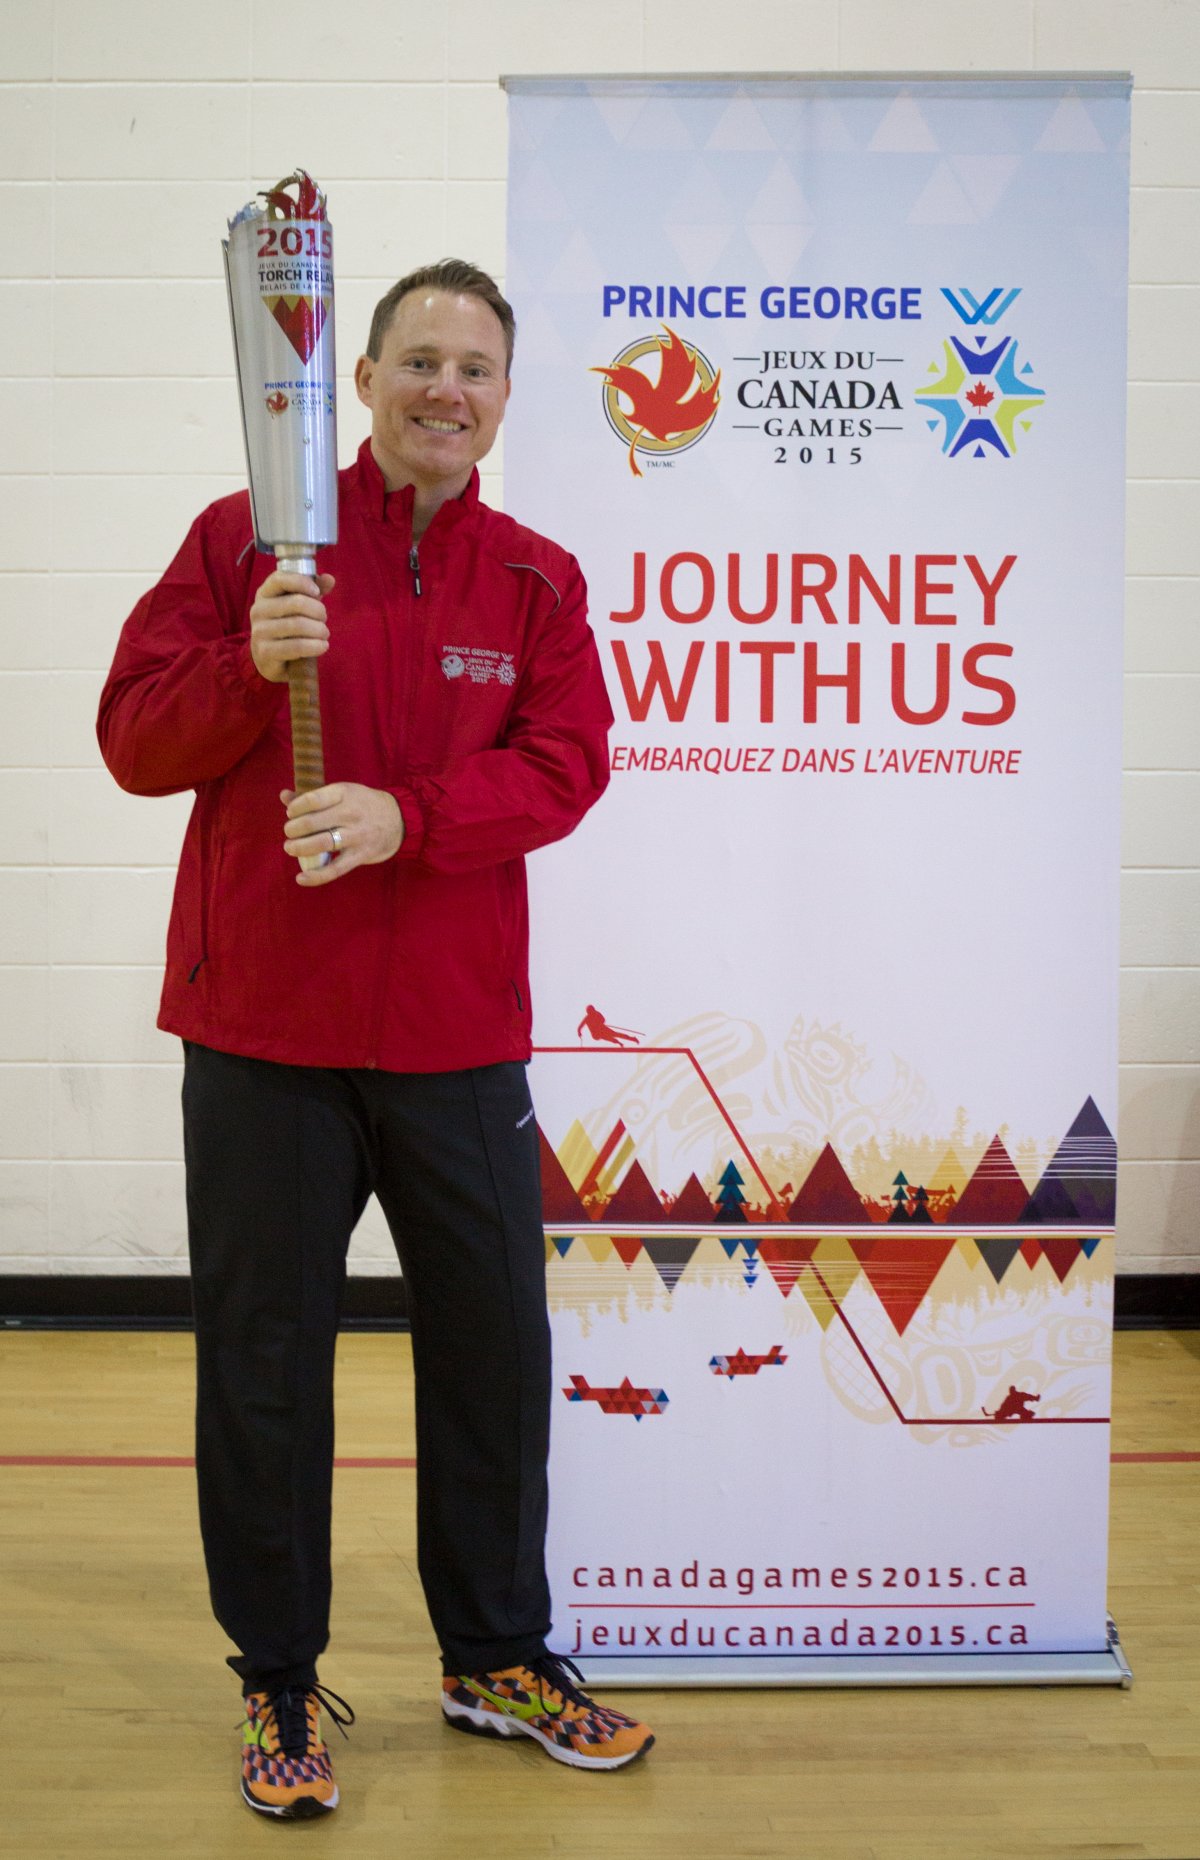 Global BC's Jay Janower was very proud to carry the torch as part of the Canada Winter Games relay.